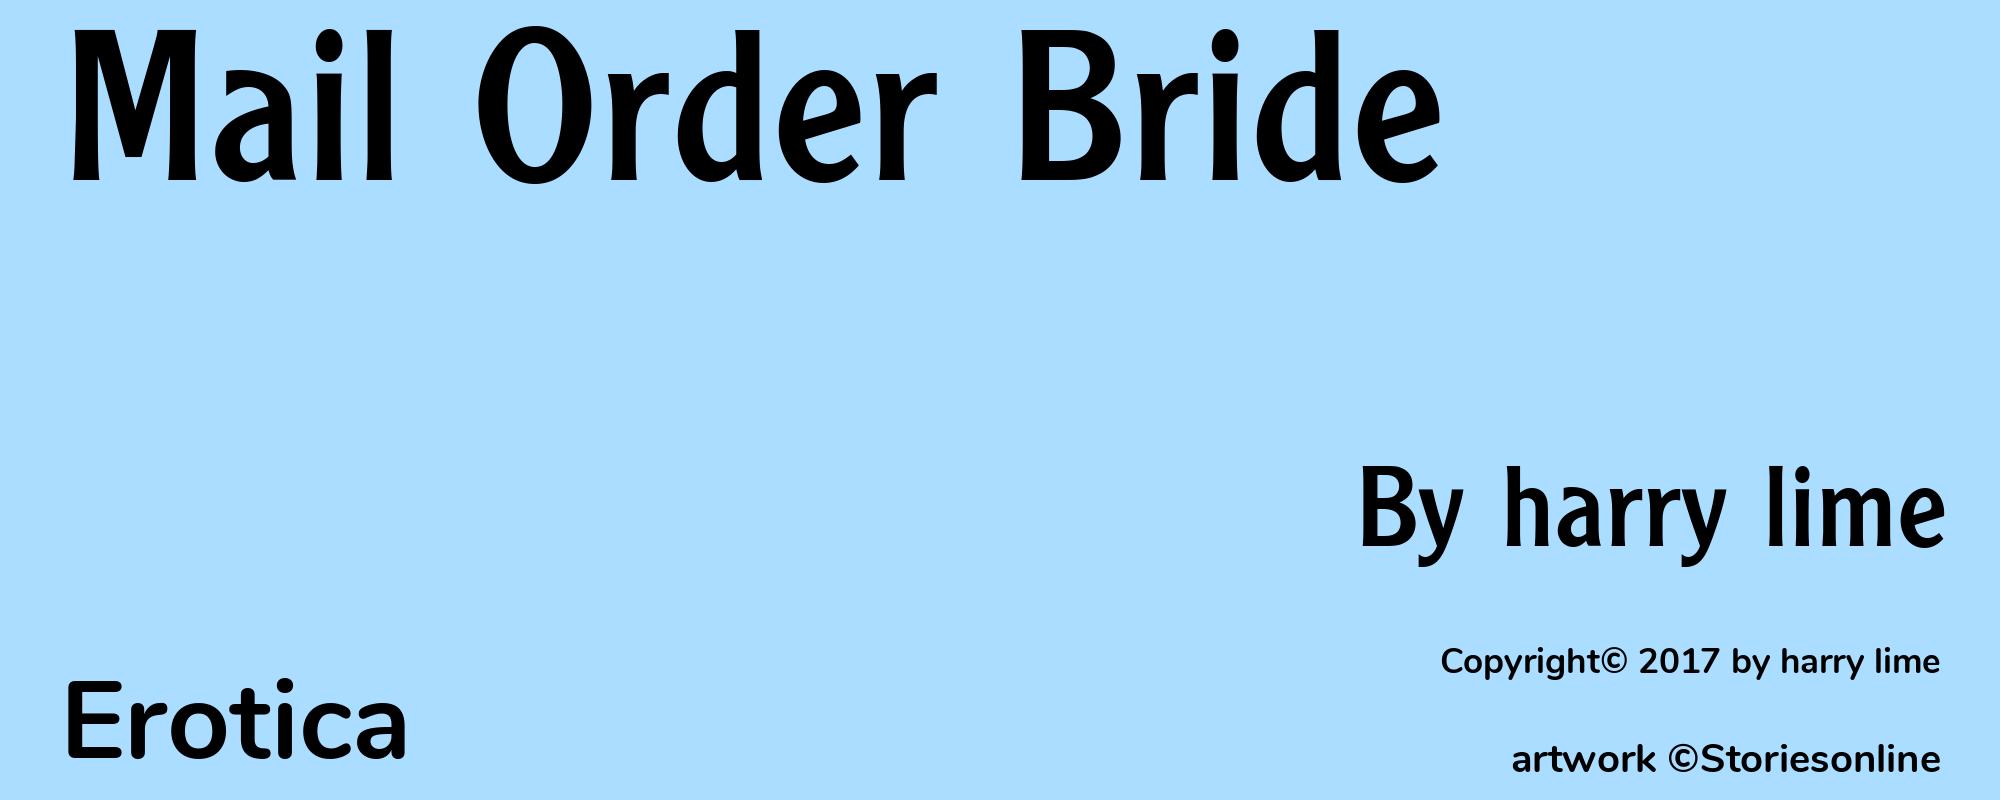 Mail Order Bride - Cover